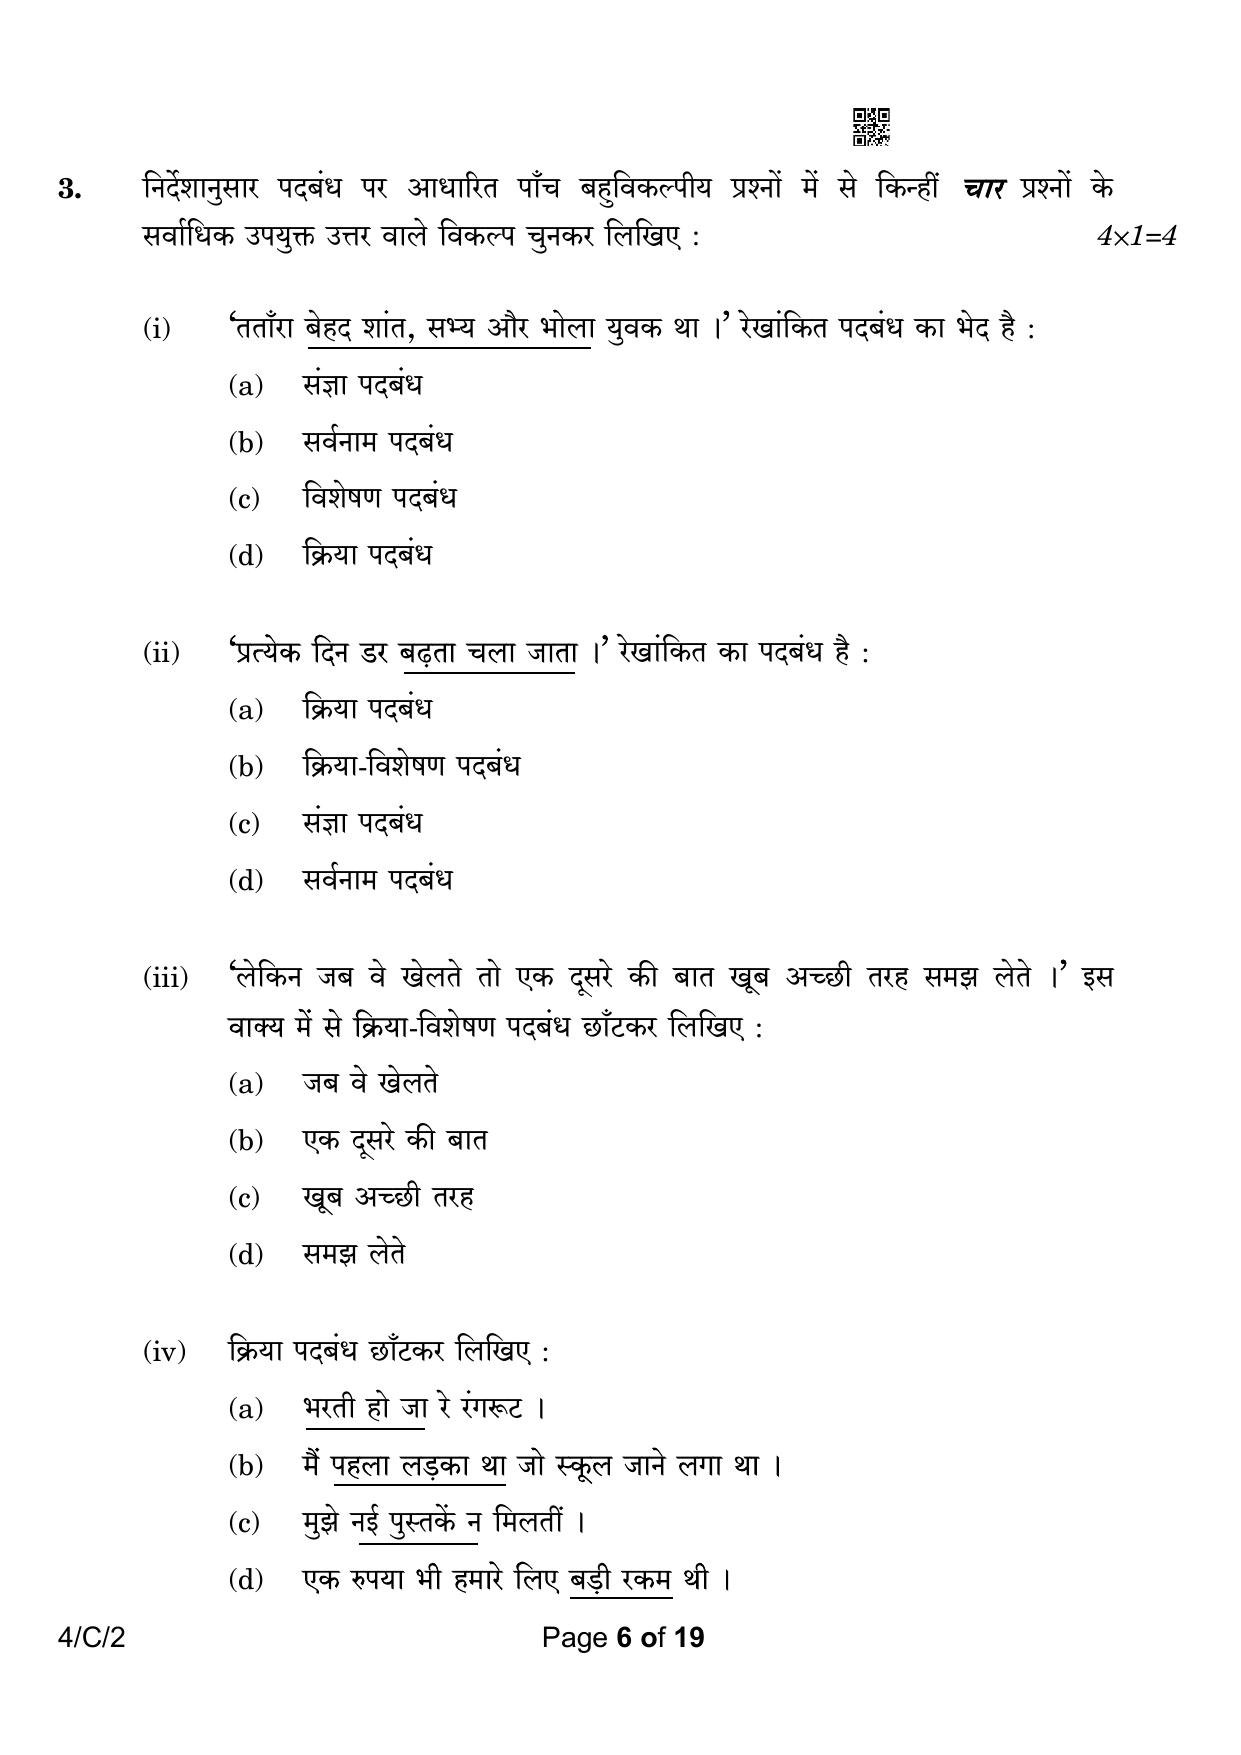 CBSE Class 10 4-2 Hindi B 2023 (Compartment) Question Paper - Page 6